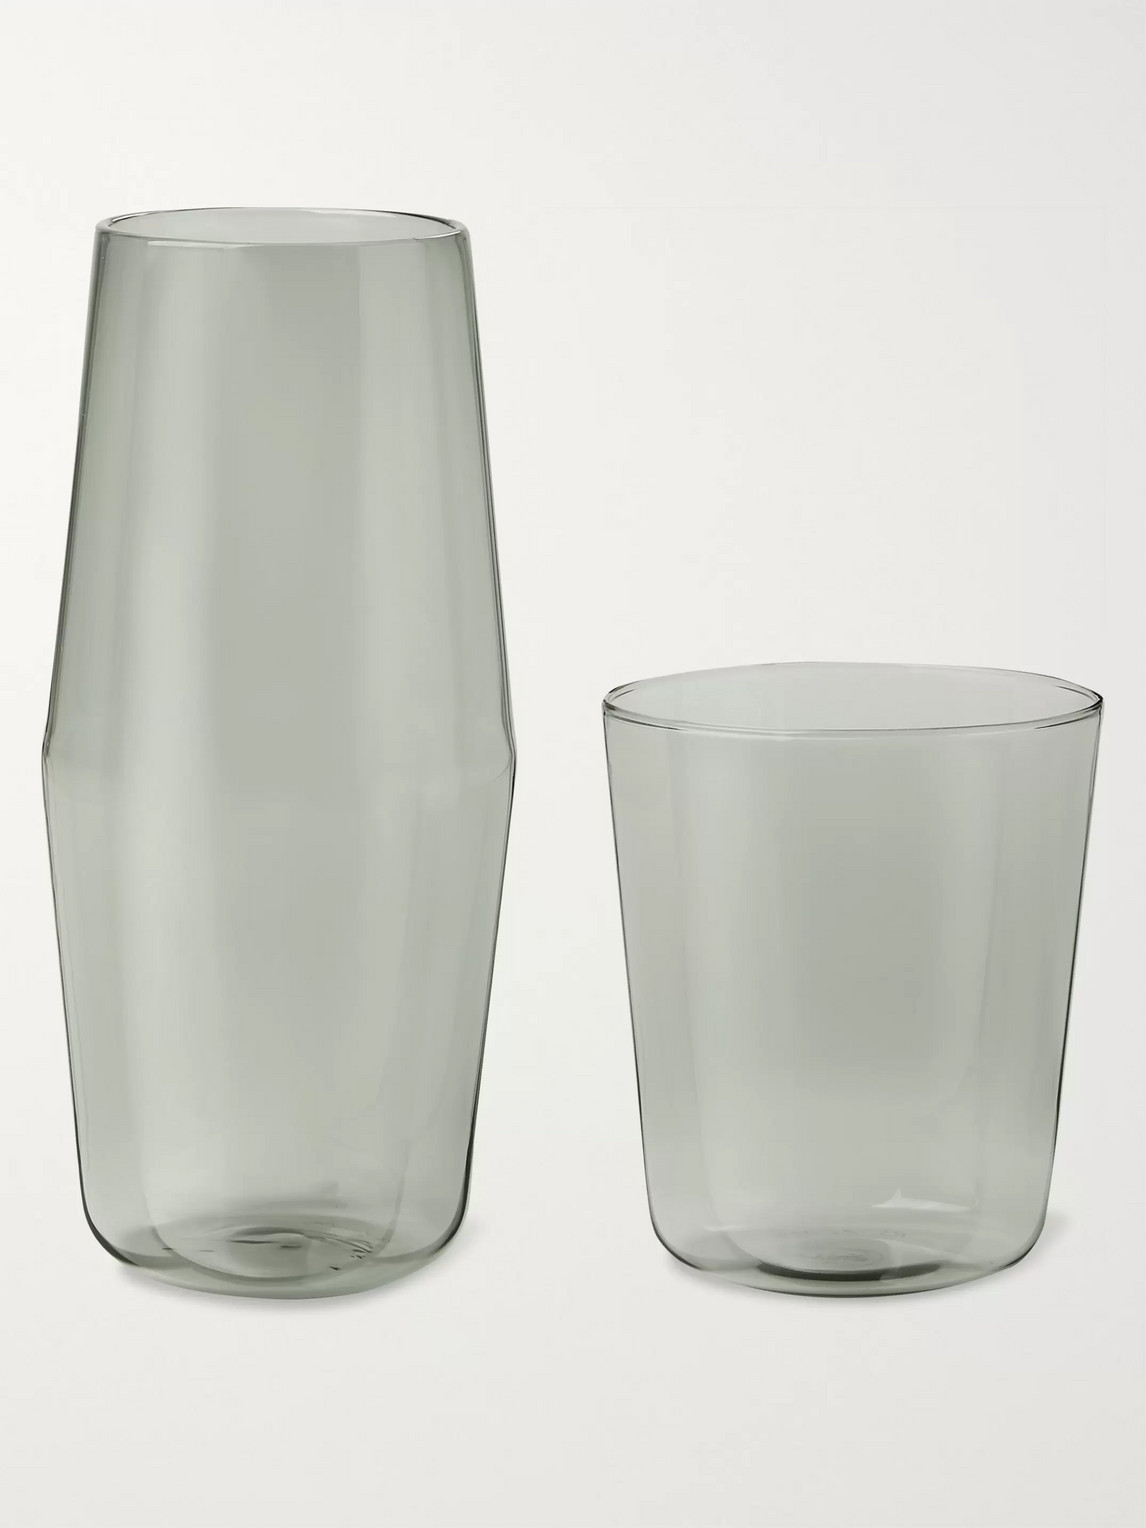 R+d.lab Luisa Bon Nuit Carafe And Glass Set In Gray